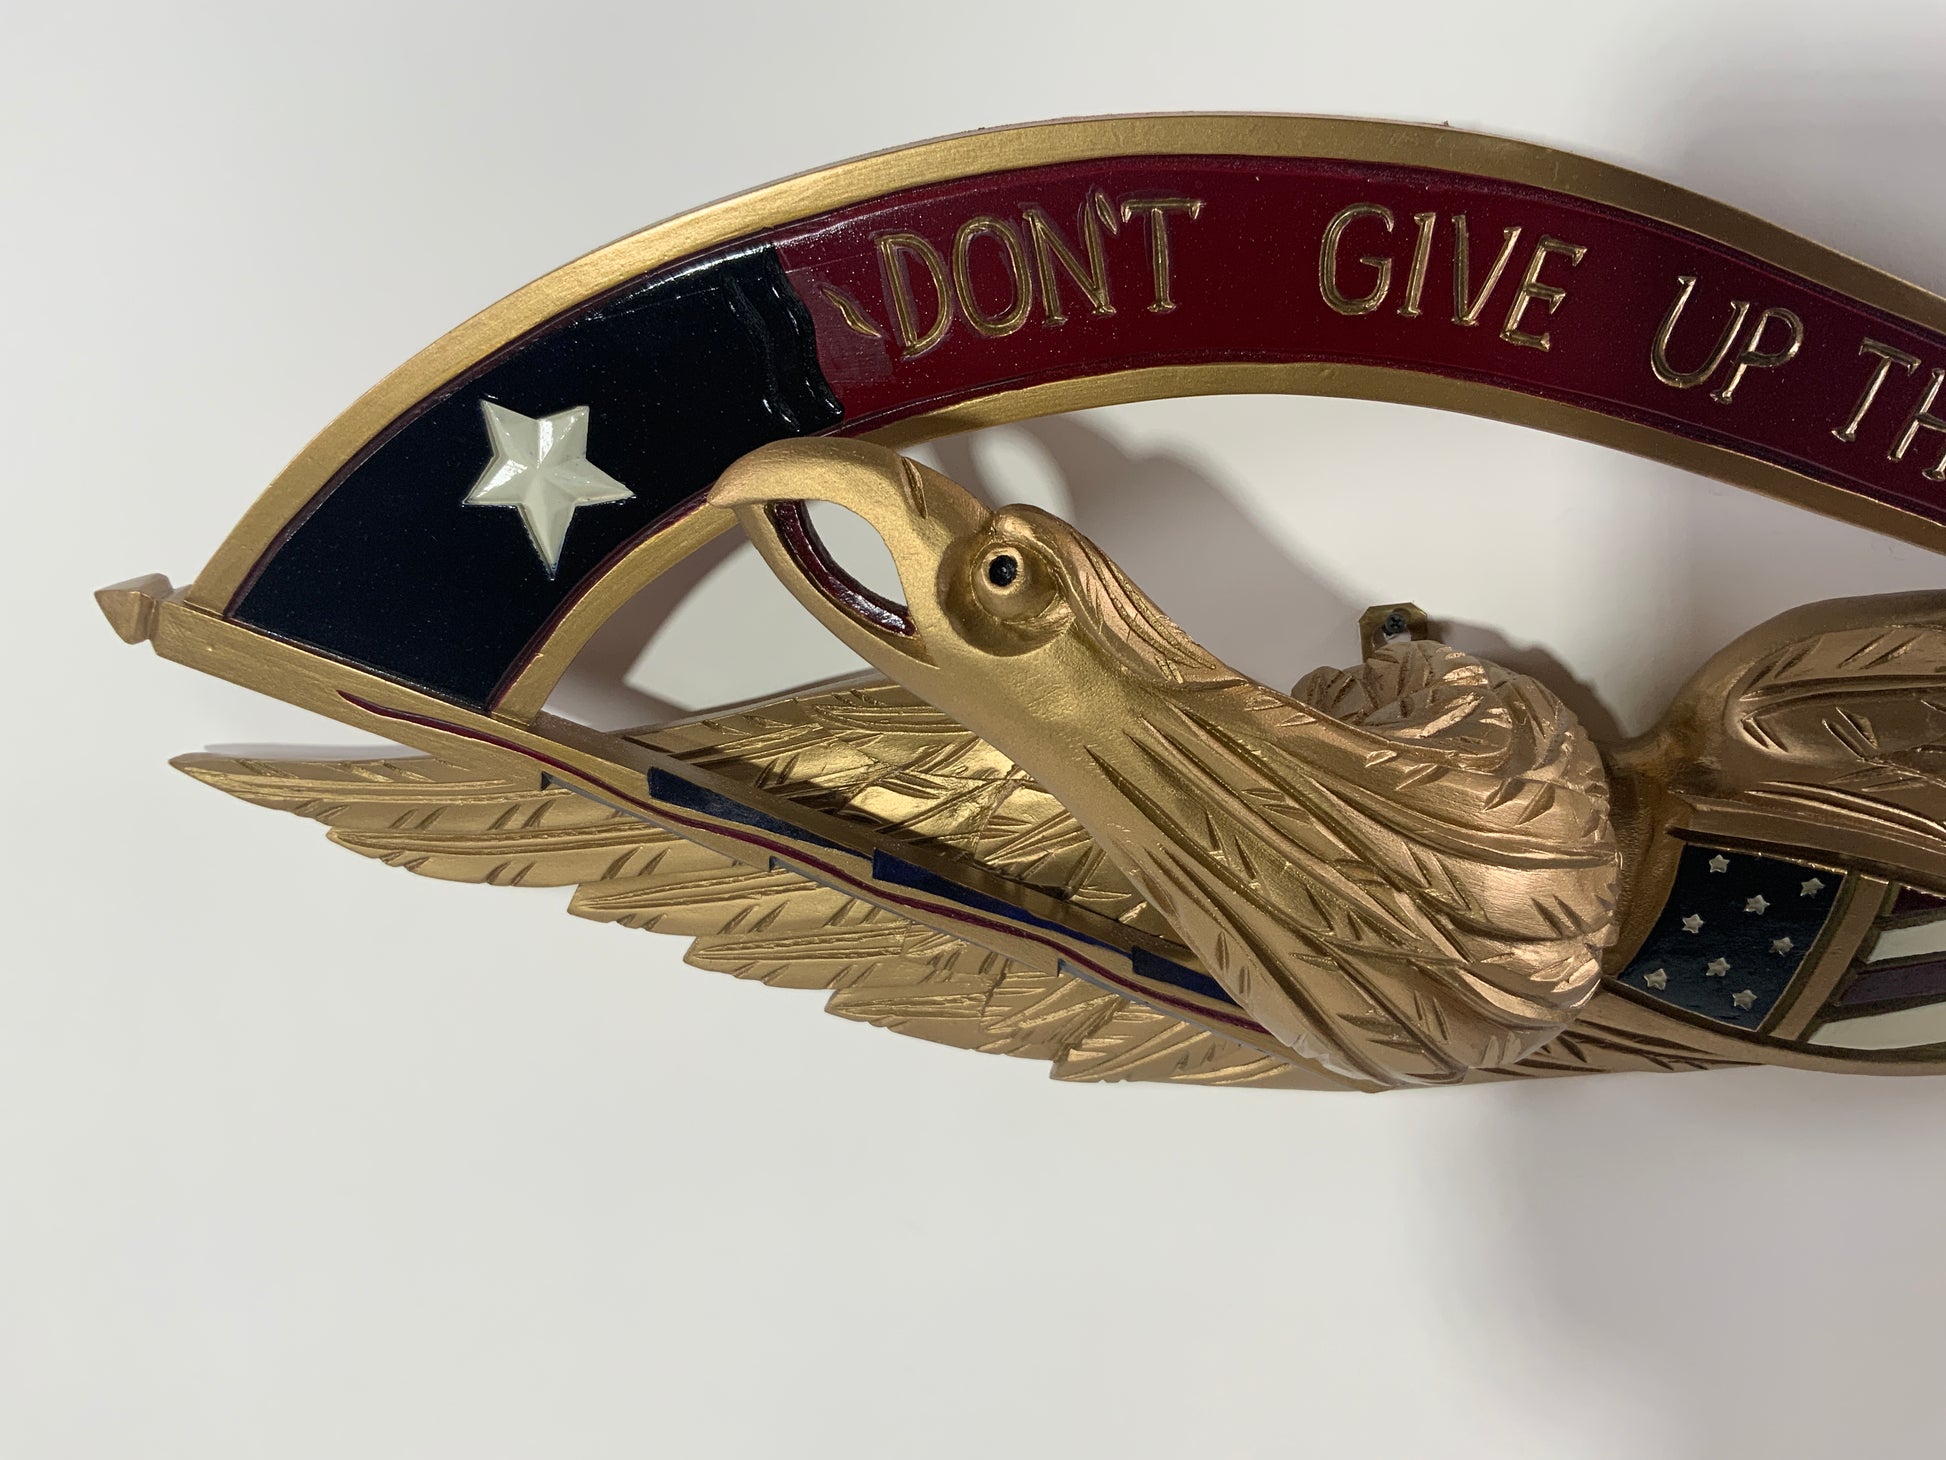 Gold Carved Eagle- Don't Give Up The Ship - Lannan Gallery